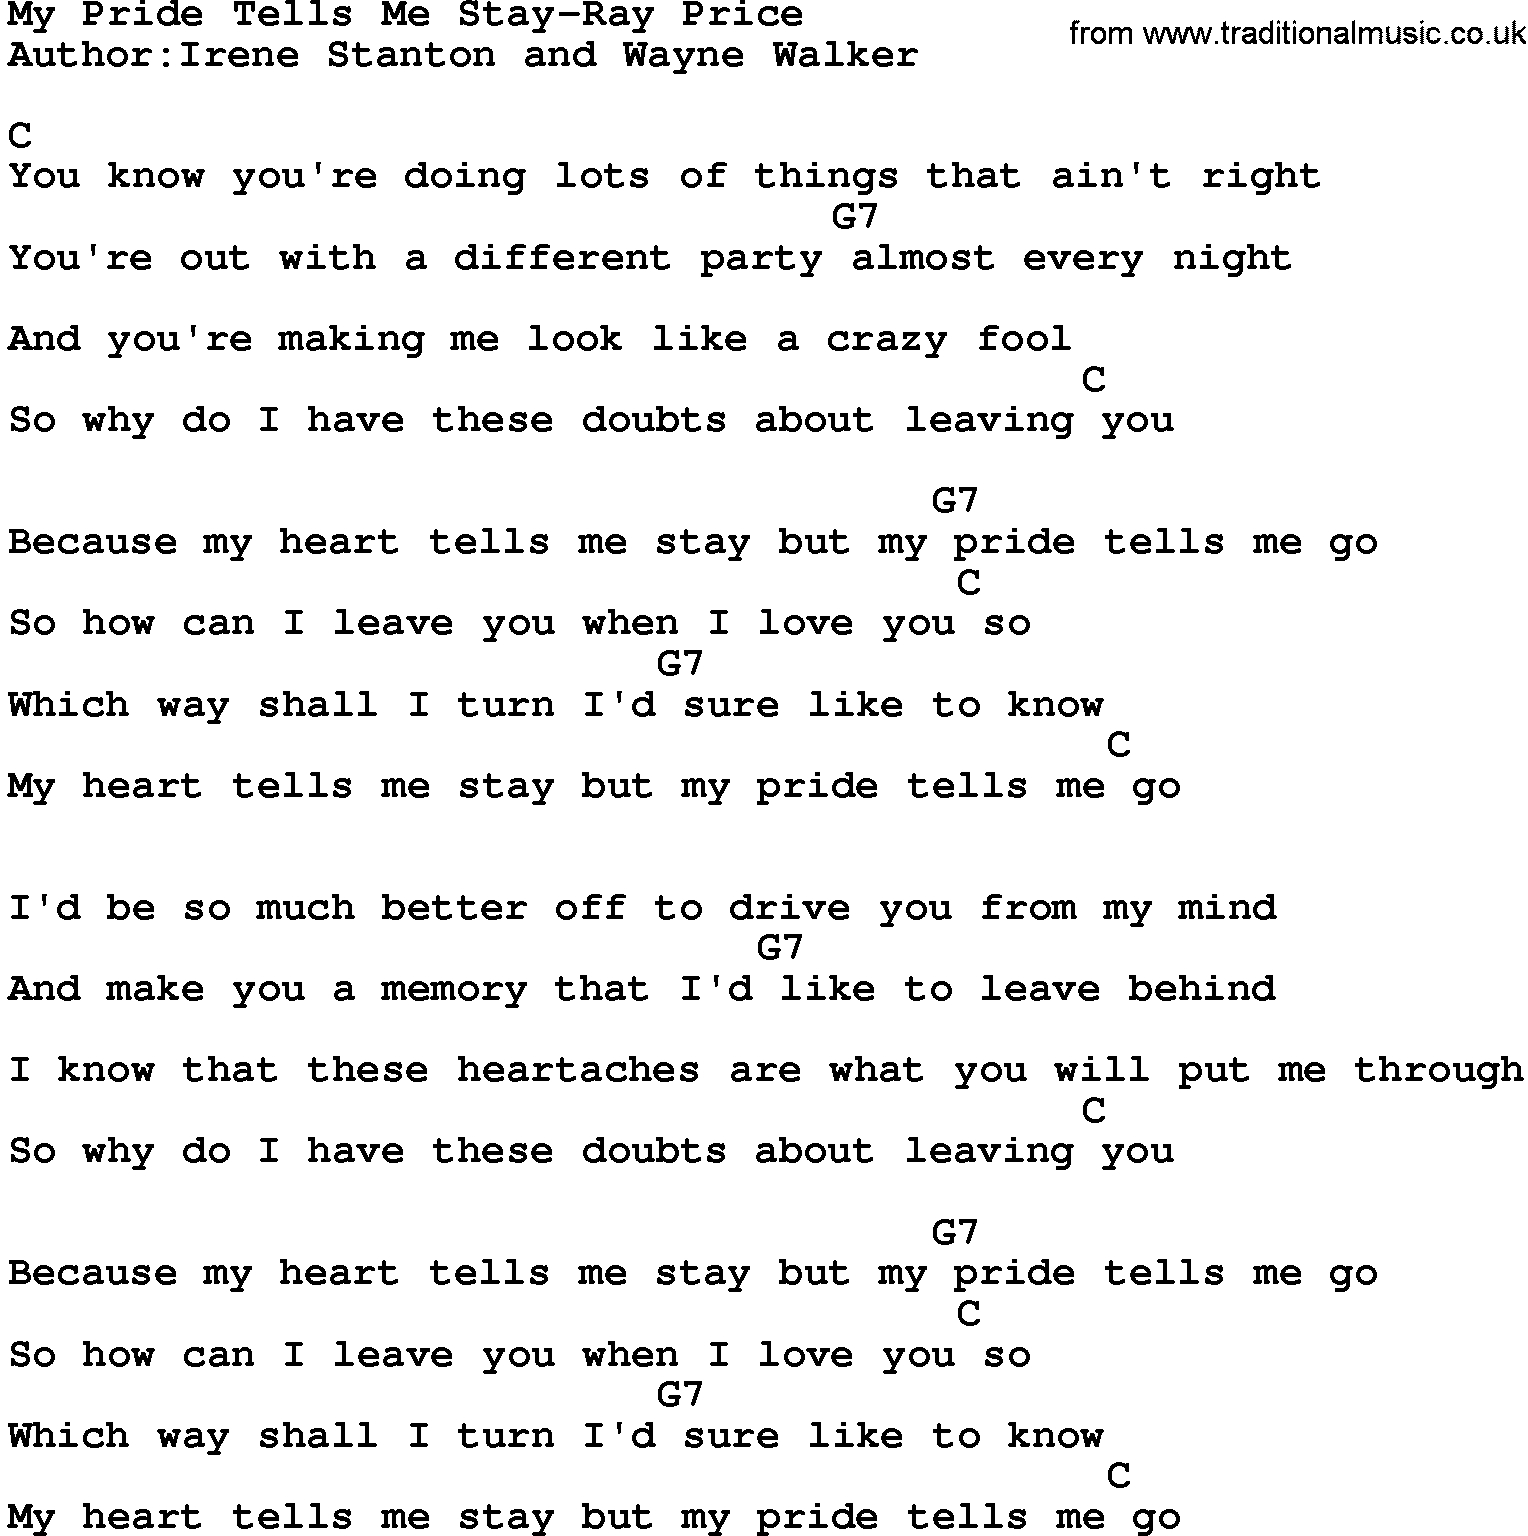 Stay With Me Chords Country Musicmy Pride Tells Me Stay Ray Price Lyrics And Chords